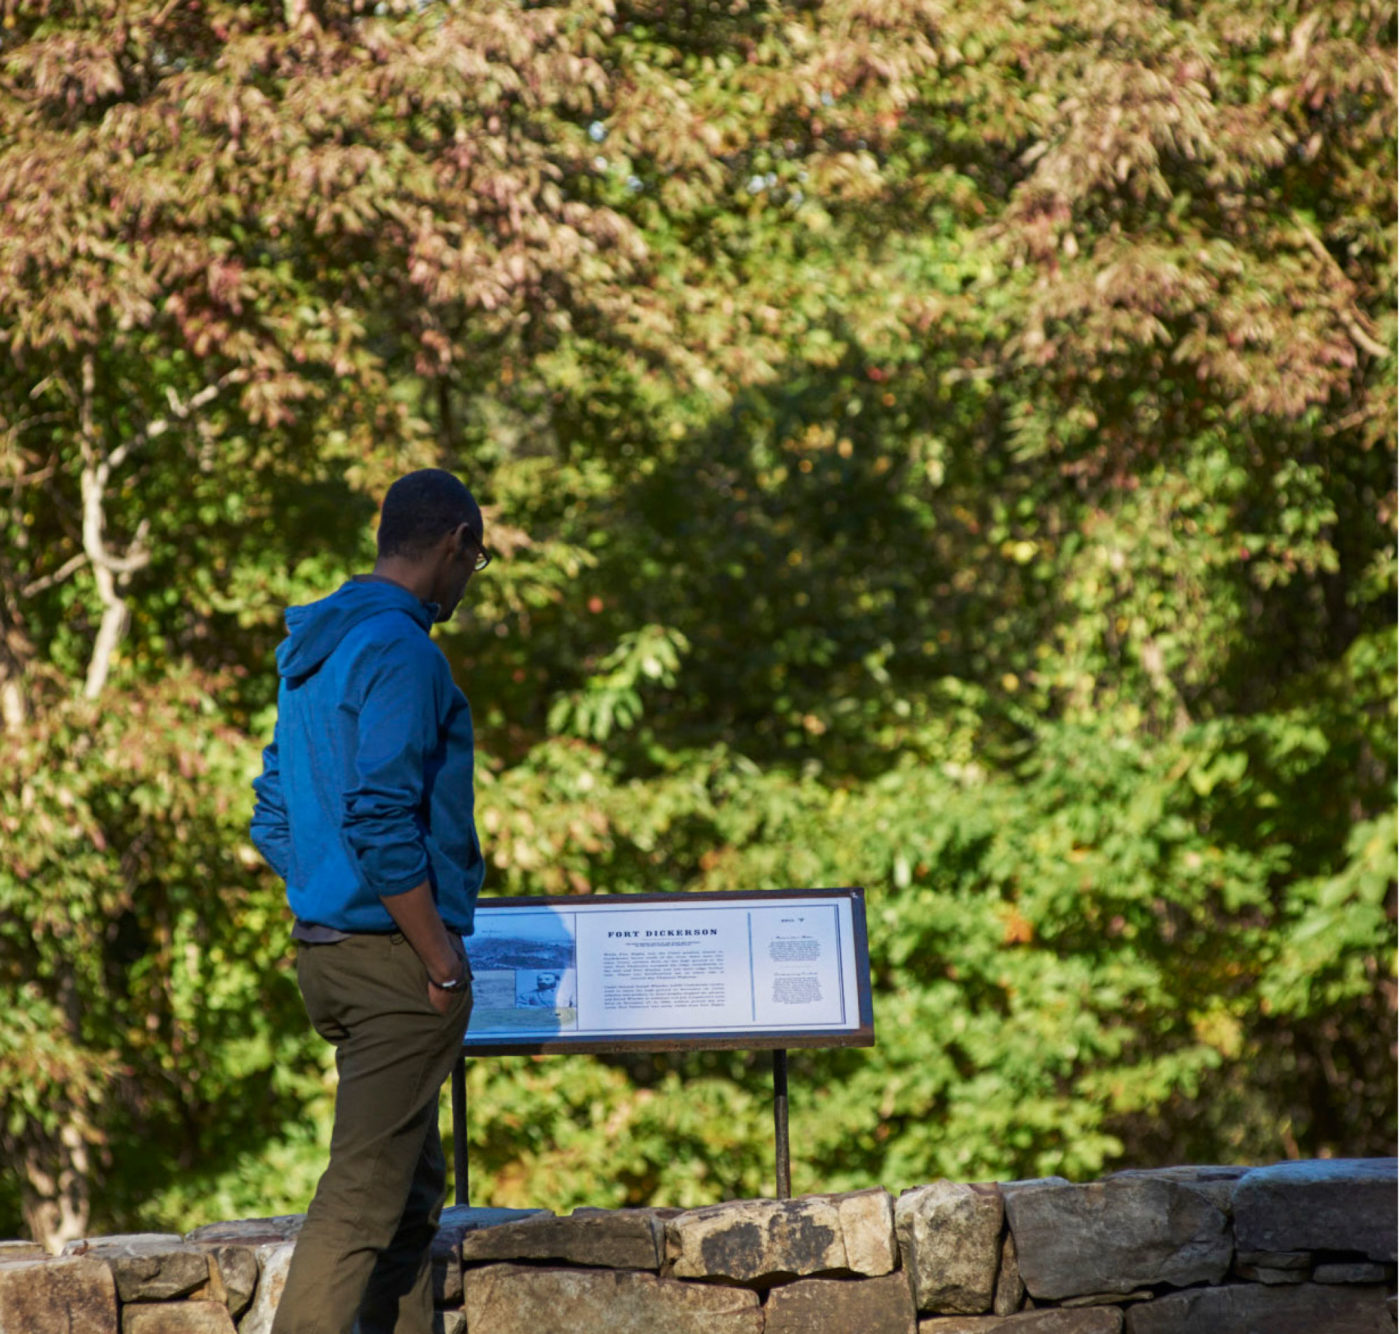 A man in a blue hoodie consults an information placard.